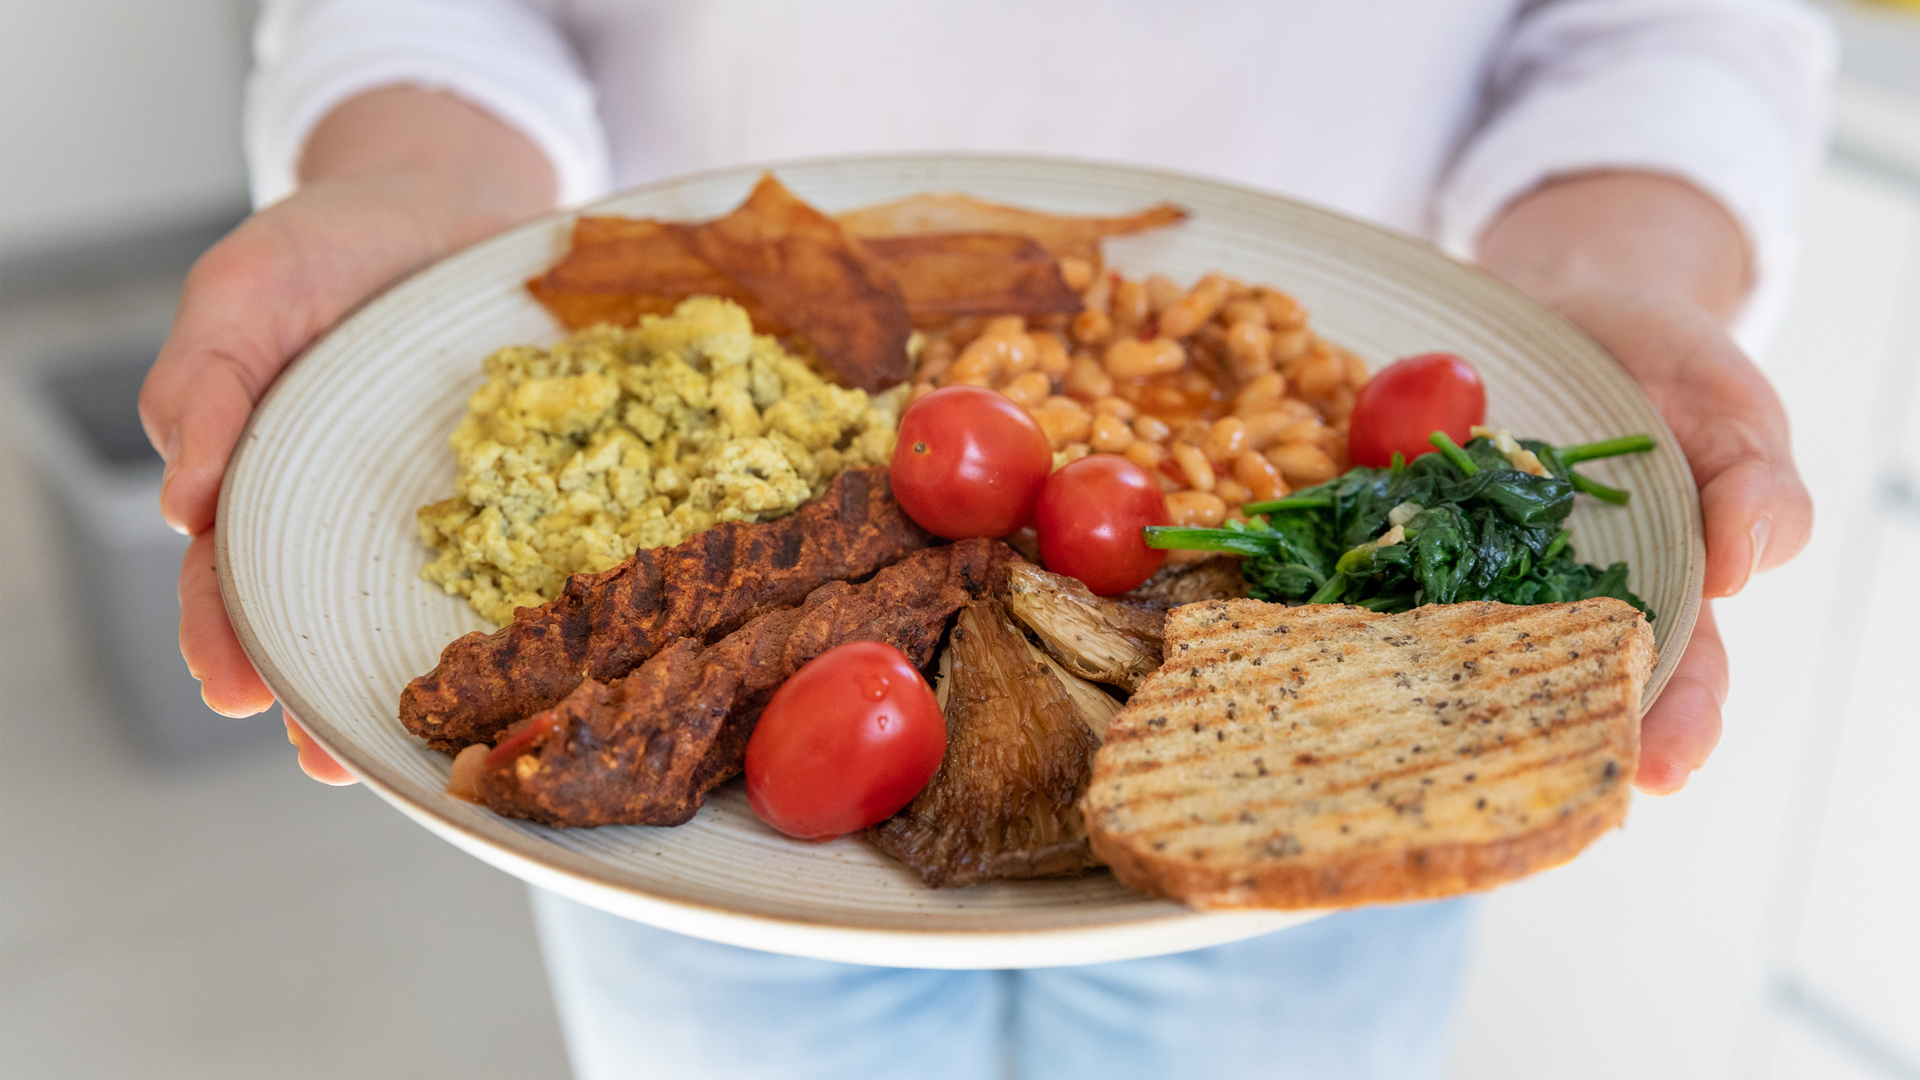 plant based sausages with scrambelled tofu in a cooked breakfast